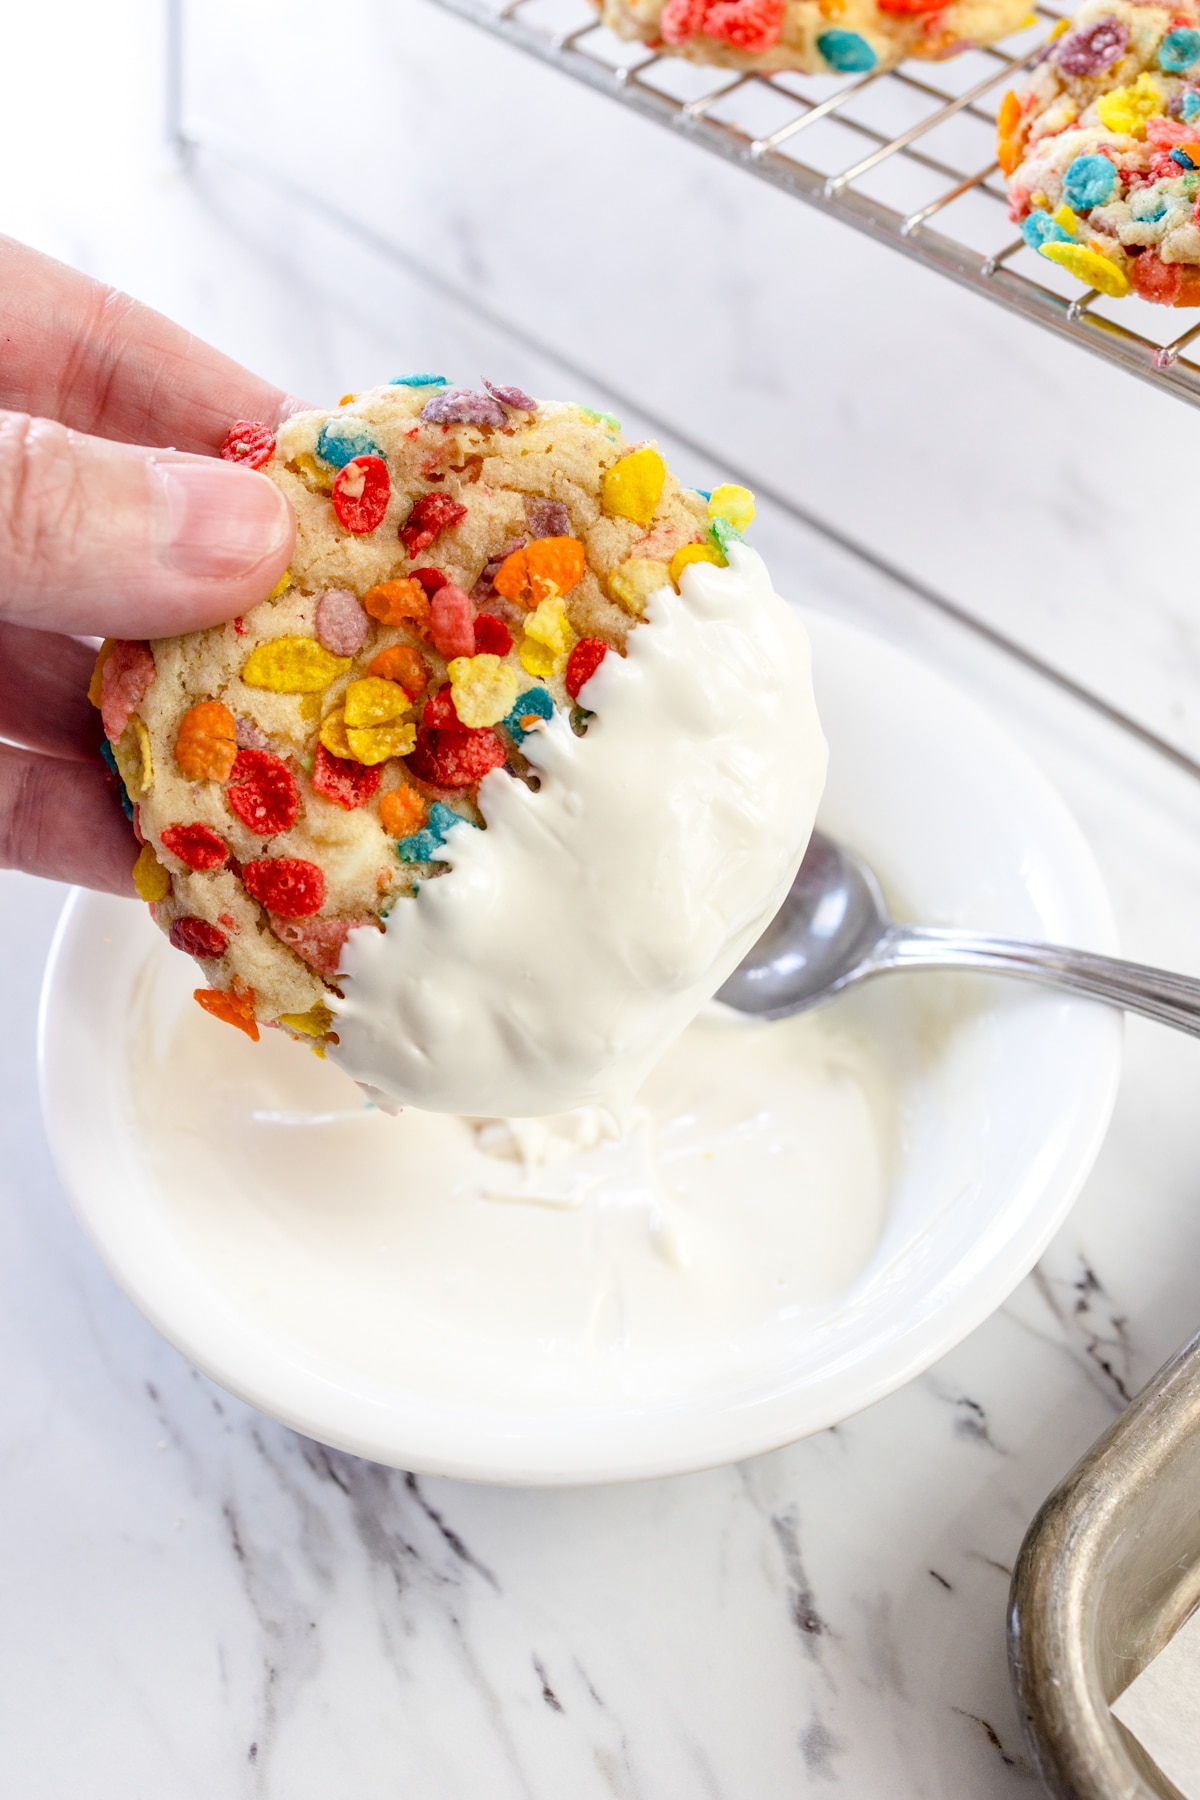 Top view of a Fruity Pebbles Cookie being dipped into melted white chocolate.